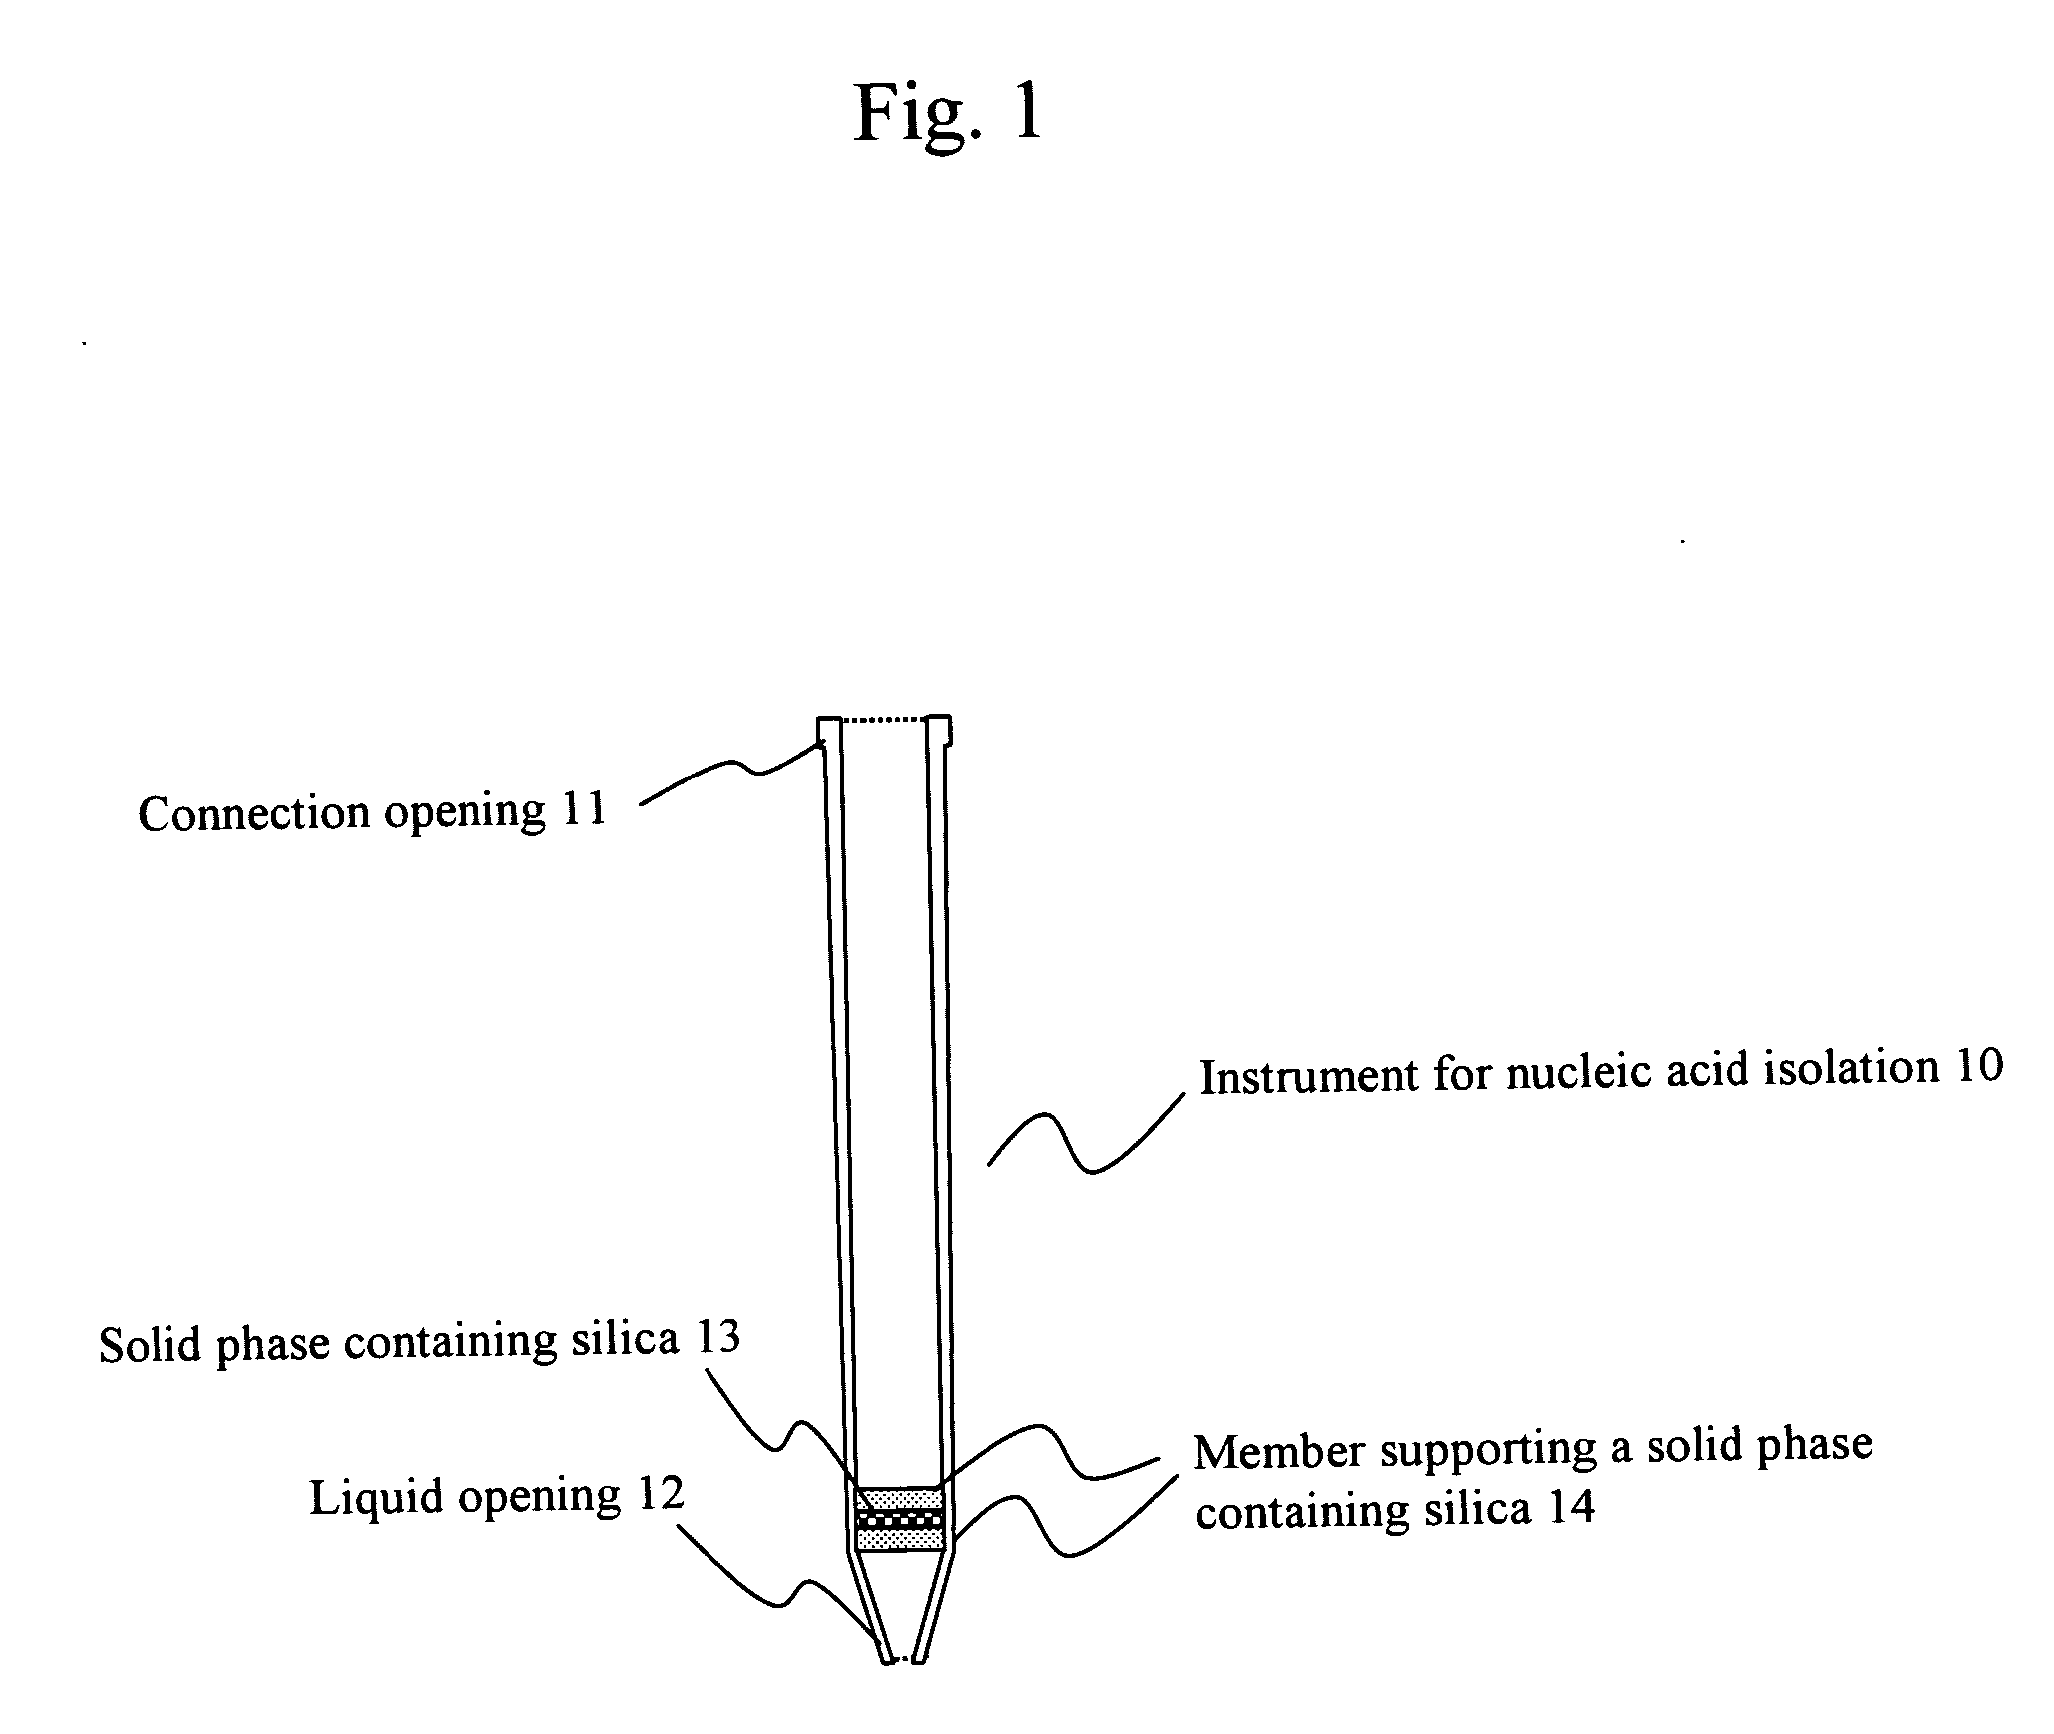 Methods for nucleic acid isolation and instruments for nucleic acid isolation